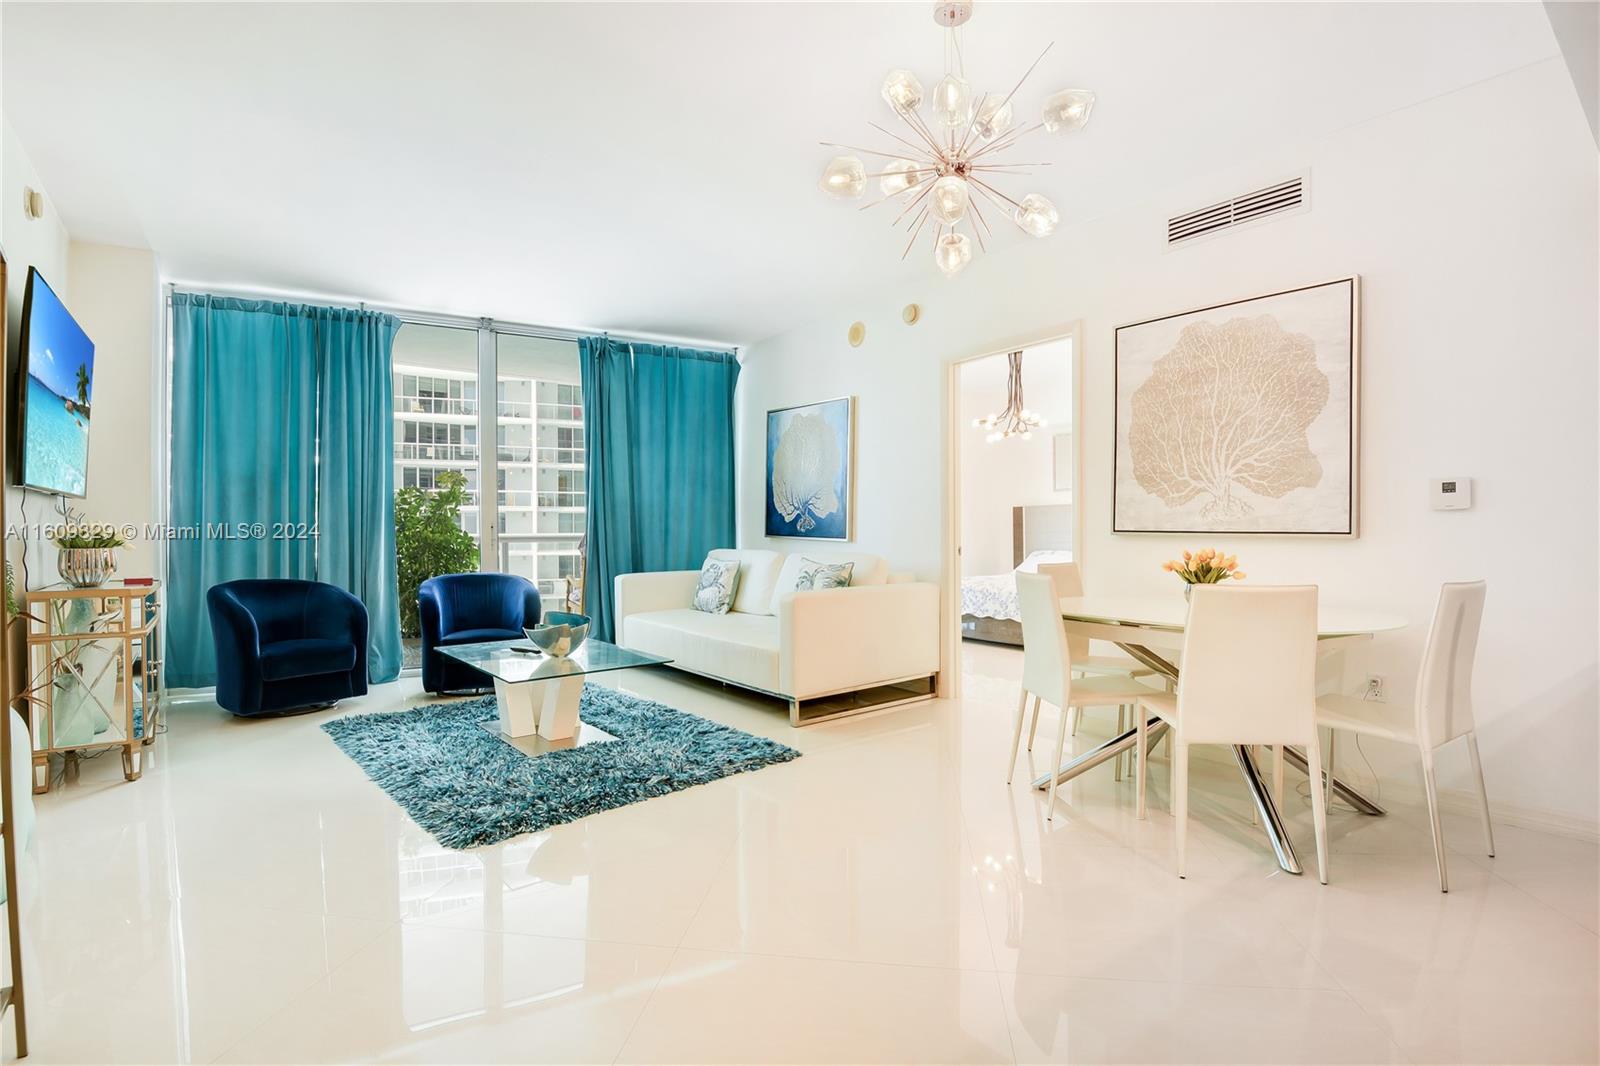 Large fully-furnished luxury condo featuring a hard-to-find split floor plan with overlooking Biscayne Bay and rooftop pool at Icon Brickell, with 2 Bedrooms, 2 Bathrooms + Den, and an oversized balcony stretching the entire wide of the apartment.  Marble floors, high-end appliances, and over 1,100 sq. ft. of living space in this pristine apartment. Amenities include the 300,000 gallon rooftop pool overlooking Biscayne Bay, a 5-star spa, waterfront gym, and multiple on-site restaurants and cafes, including Cipriani!  Enjoy a location that is just steps to all the best dining, shopping, and nightlife in Brickell, and just a short ride to the beach!